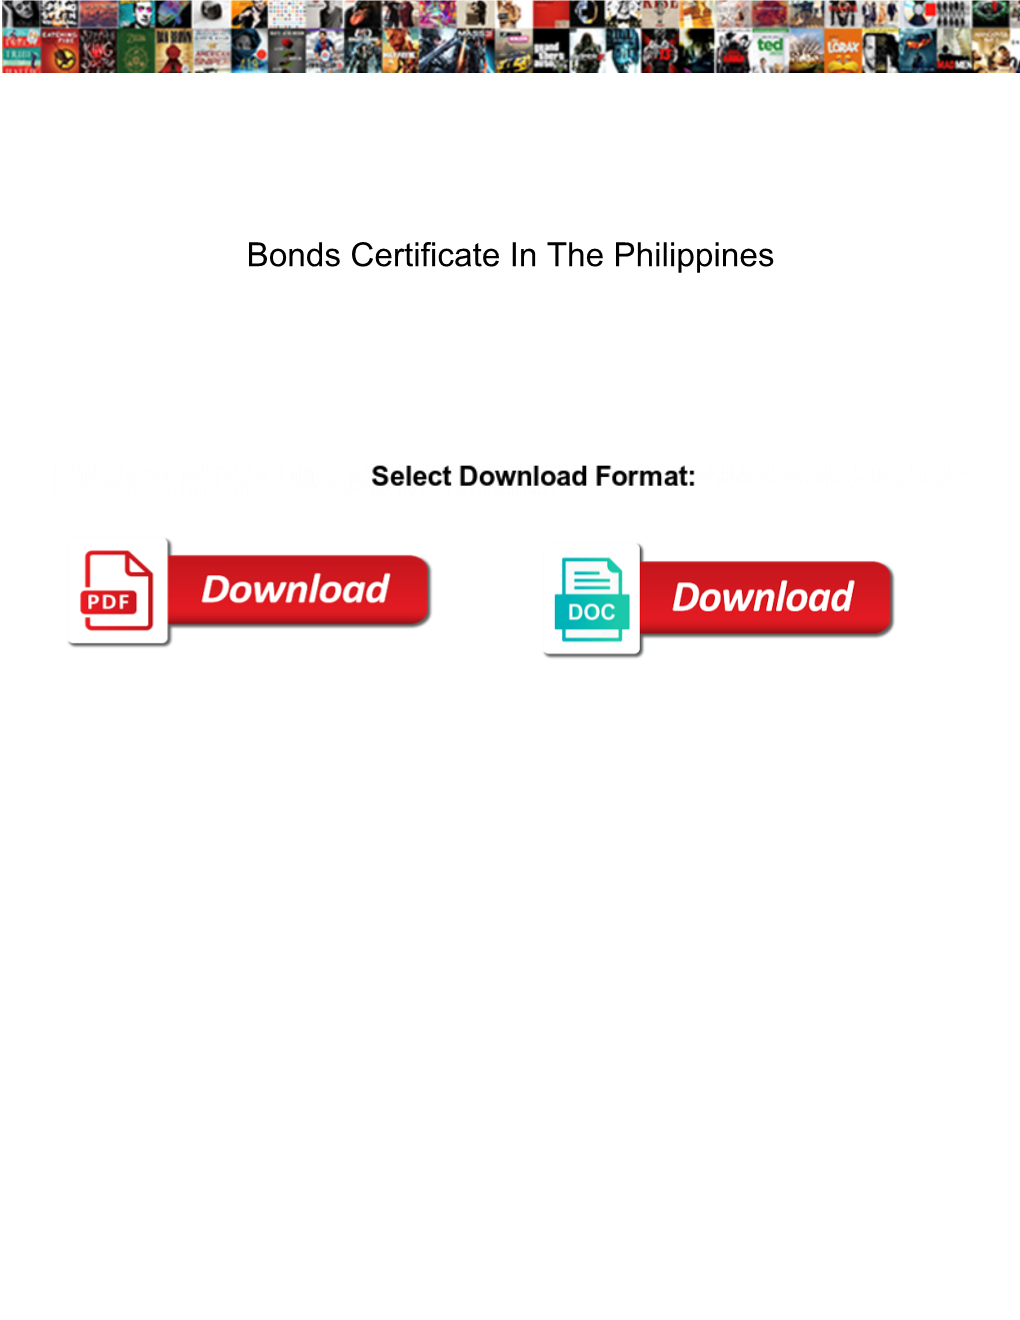 Bonds Certificate in the Philippines